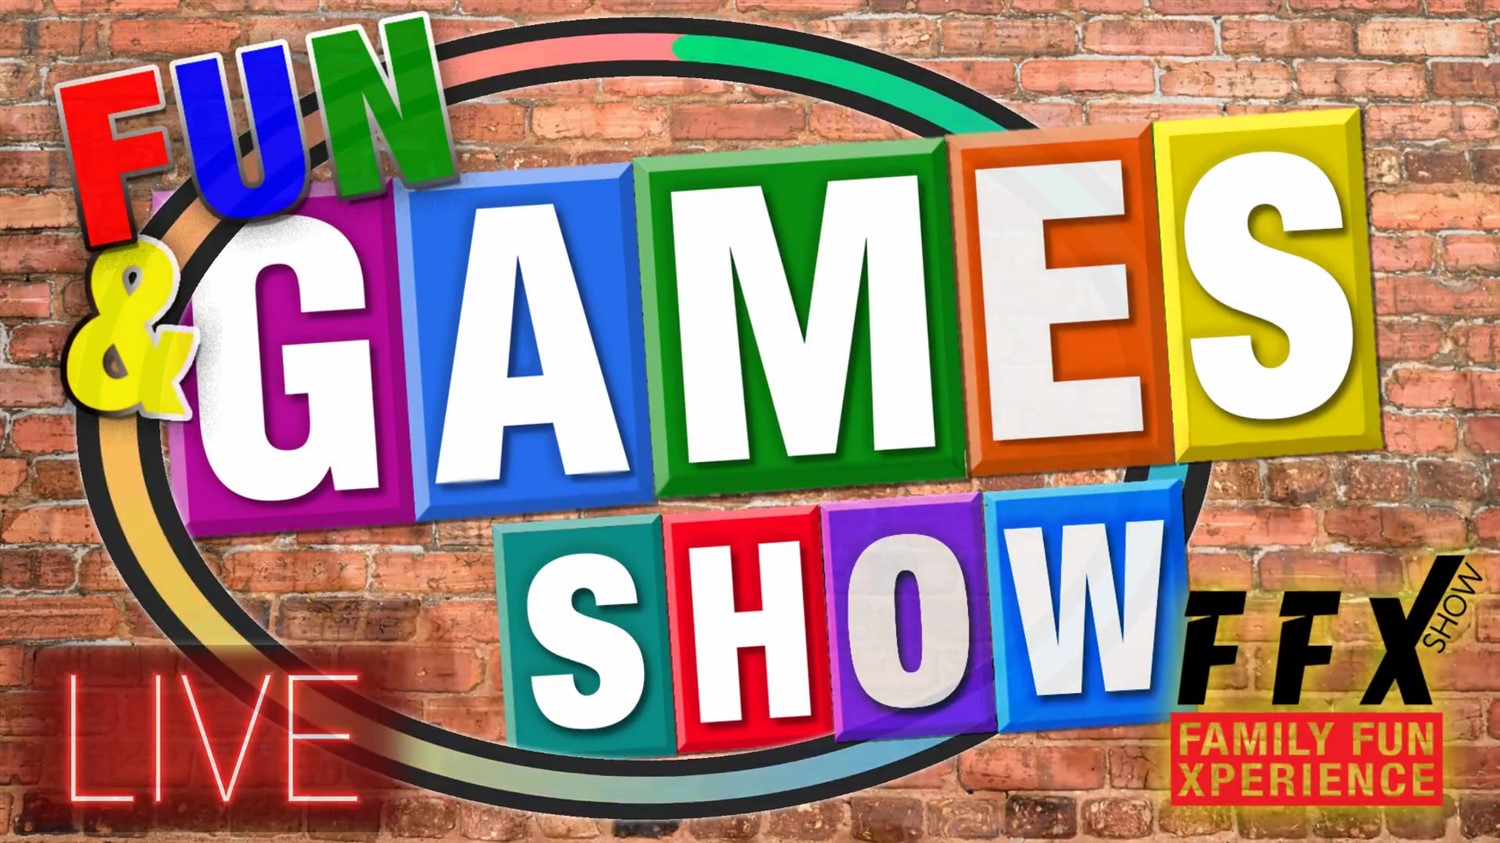 FUN & GAMES SHOW! 5 Star Fun for the whole family! on Mar 23, 19:00@FFX Theatre - Buy tickets and Get information on Family Fun Xperience tickets.ffxshow.org